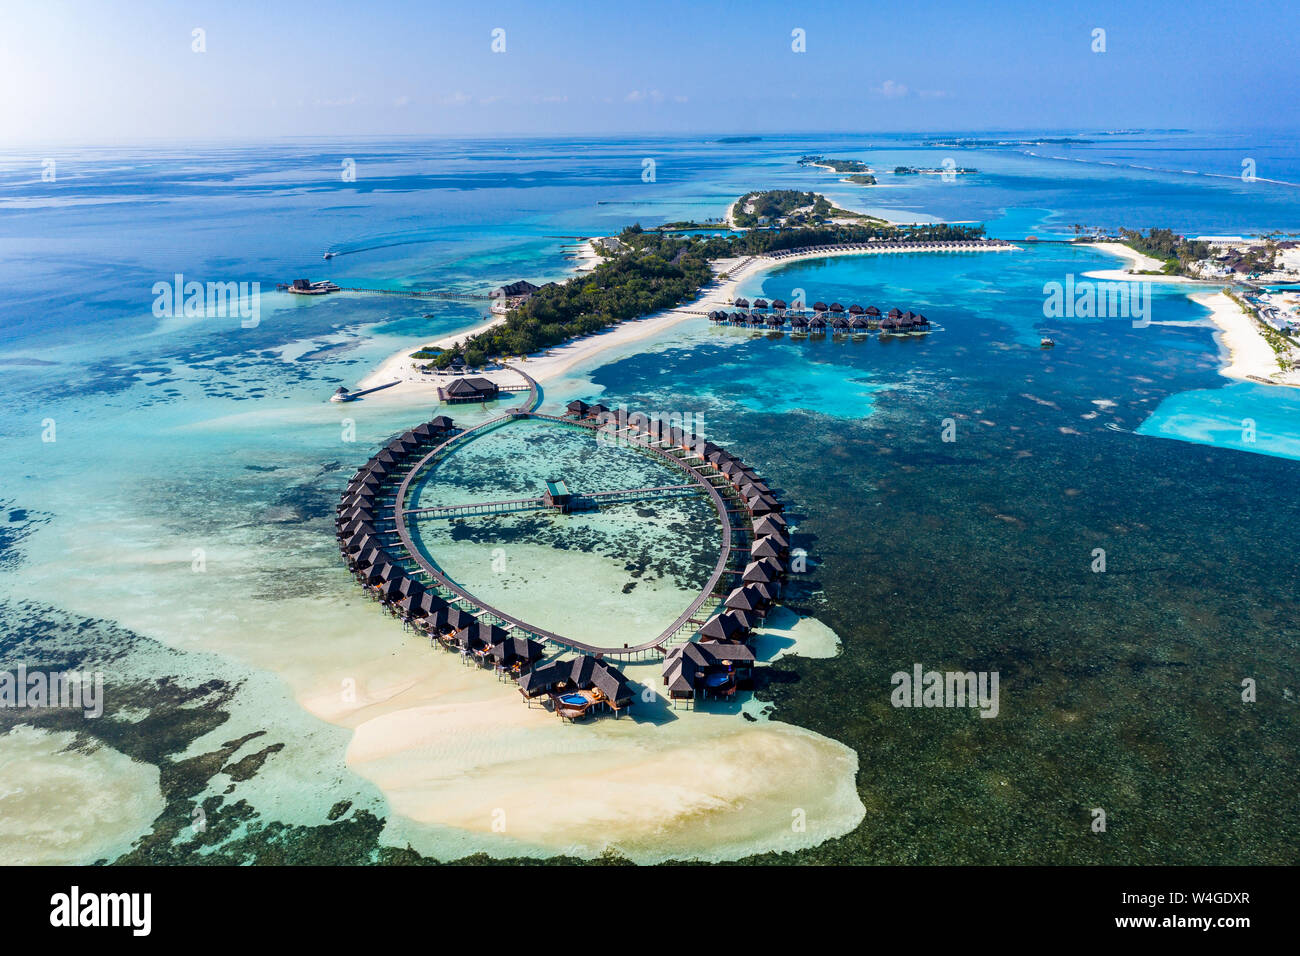 Aerial view over Olhuveli and Bodufinolhu with Fun Island Resort, South Male Atoll, Maldives Stock Photo